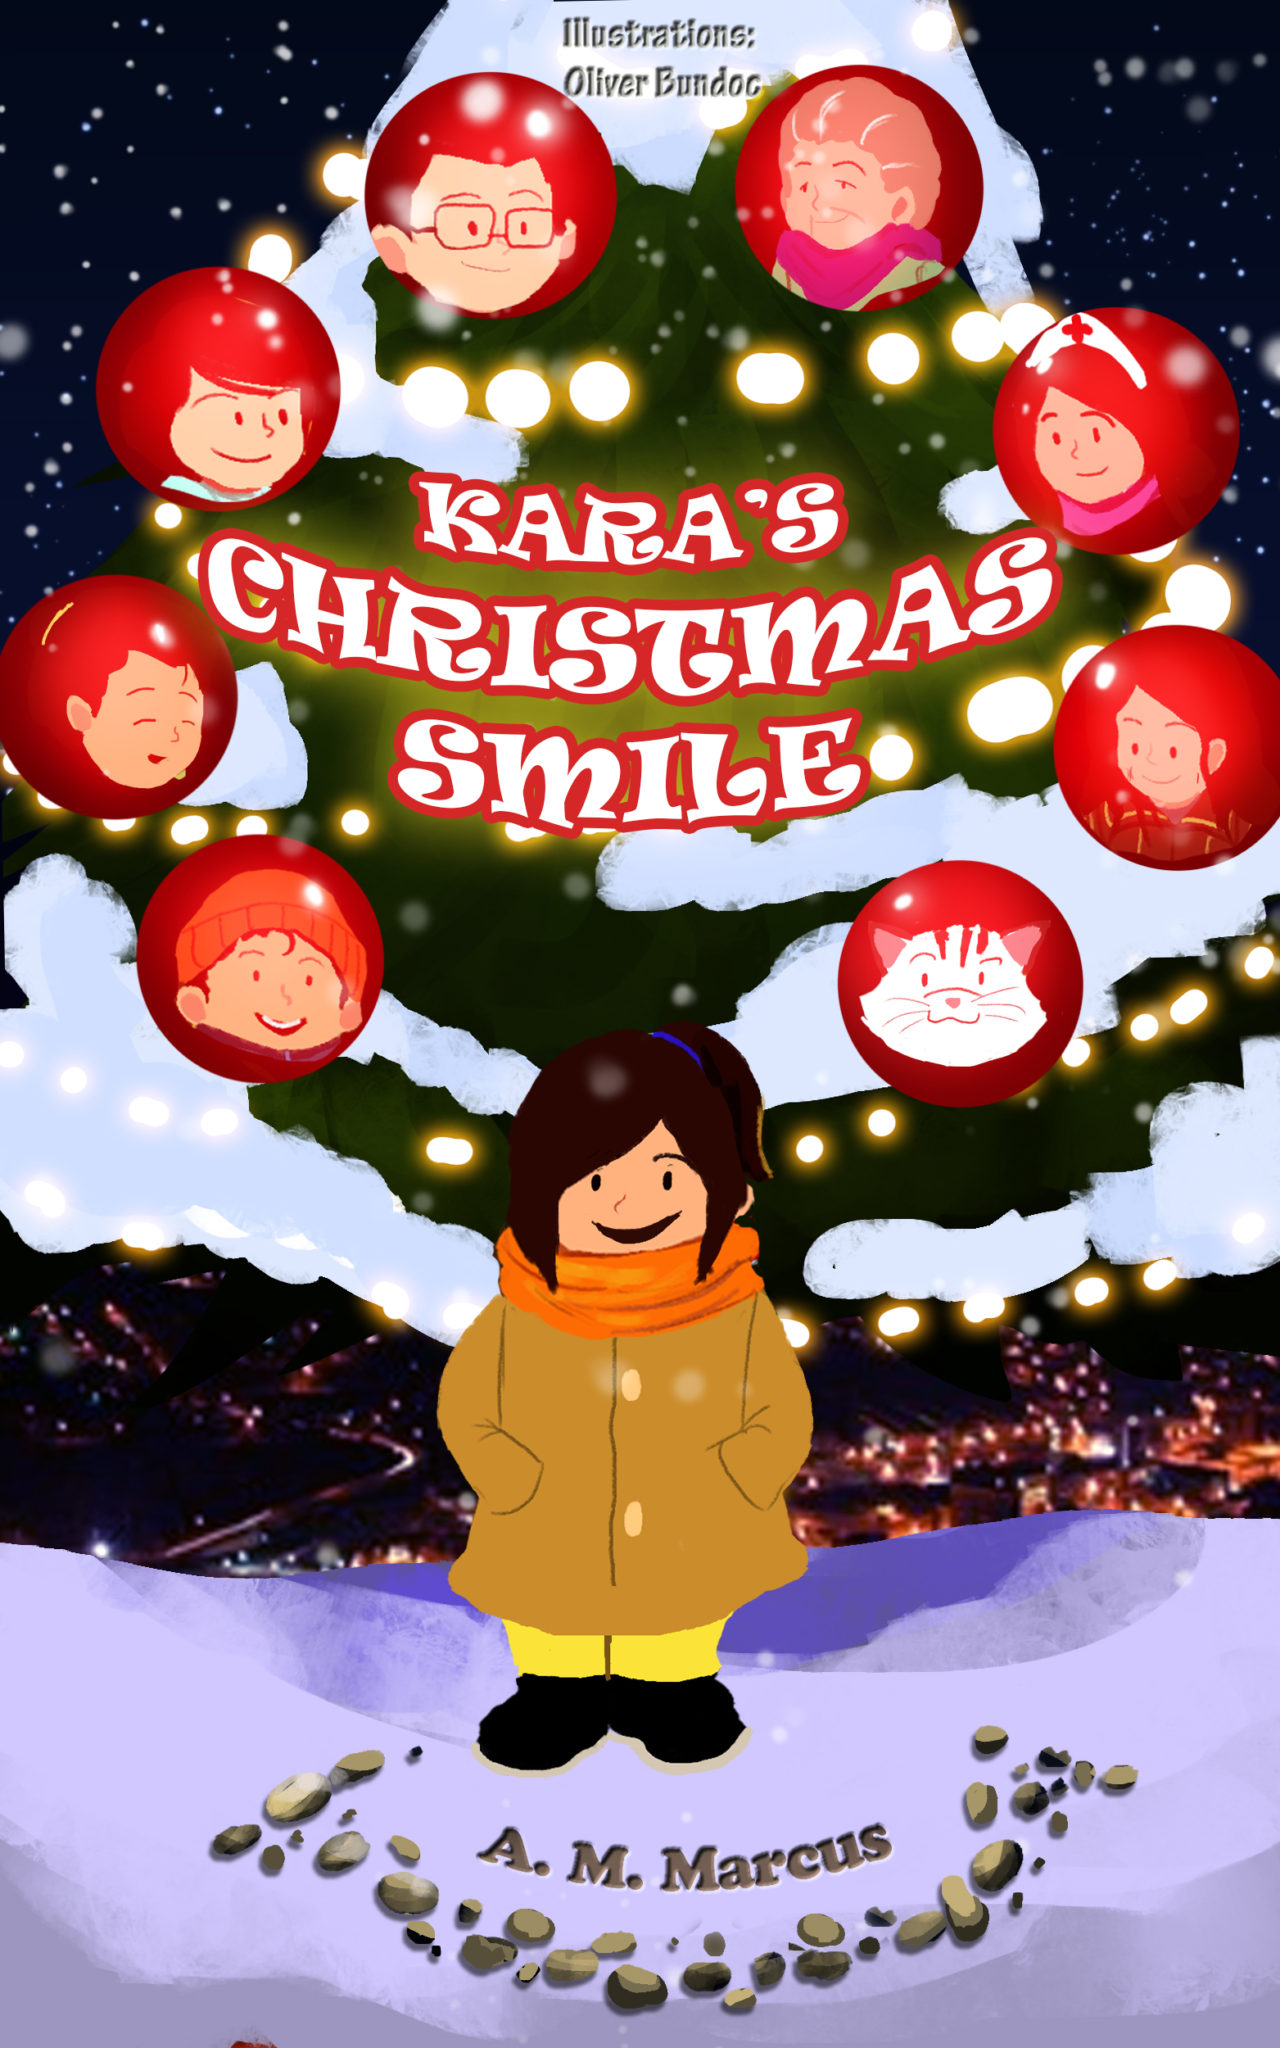 FREE: Kara’s Christmas Smile by A. M. Marcus